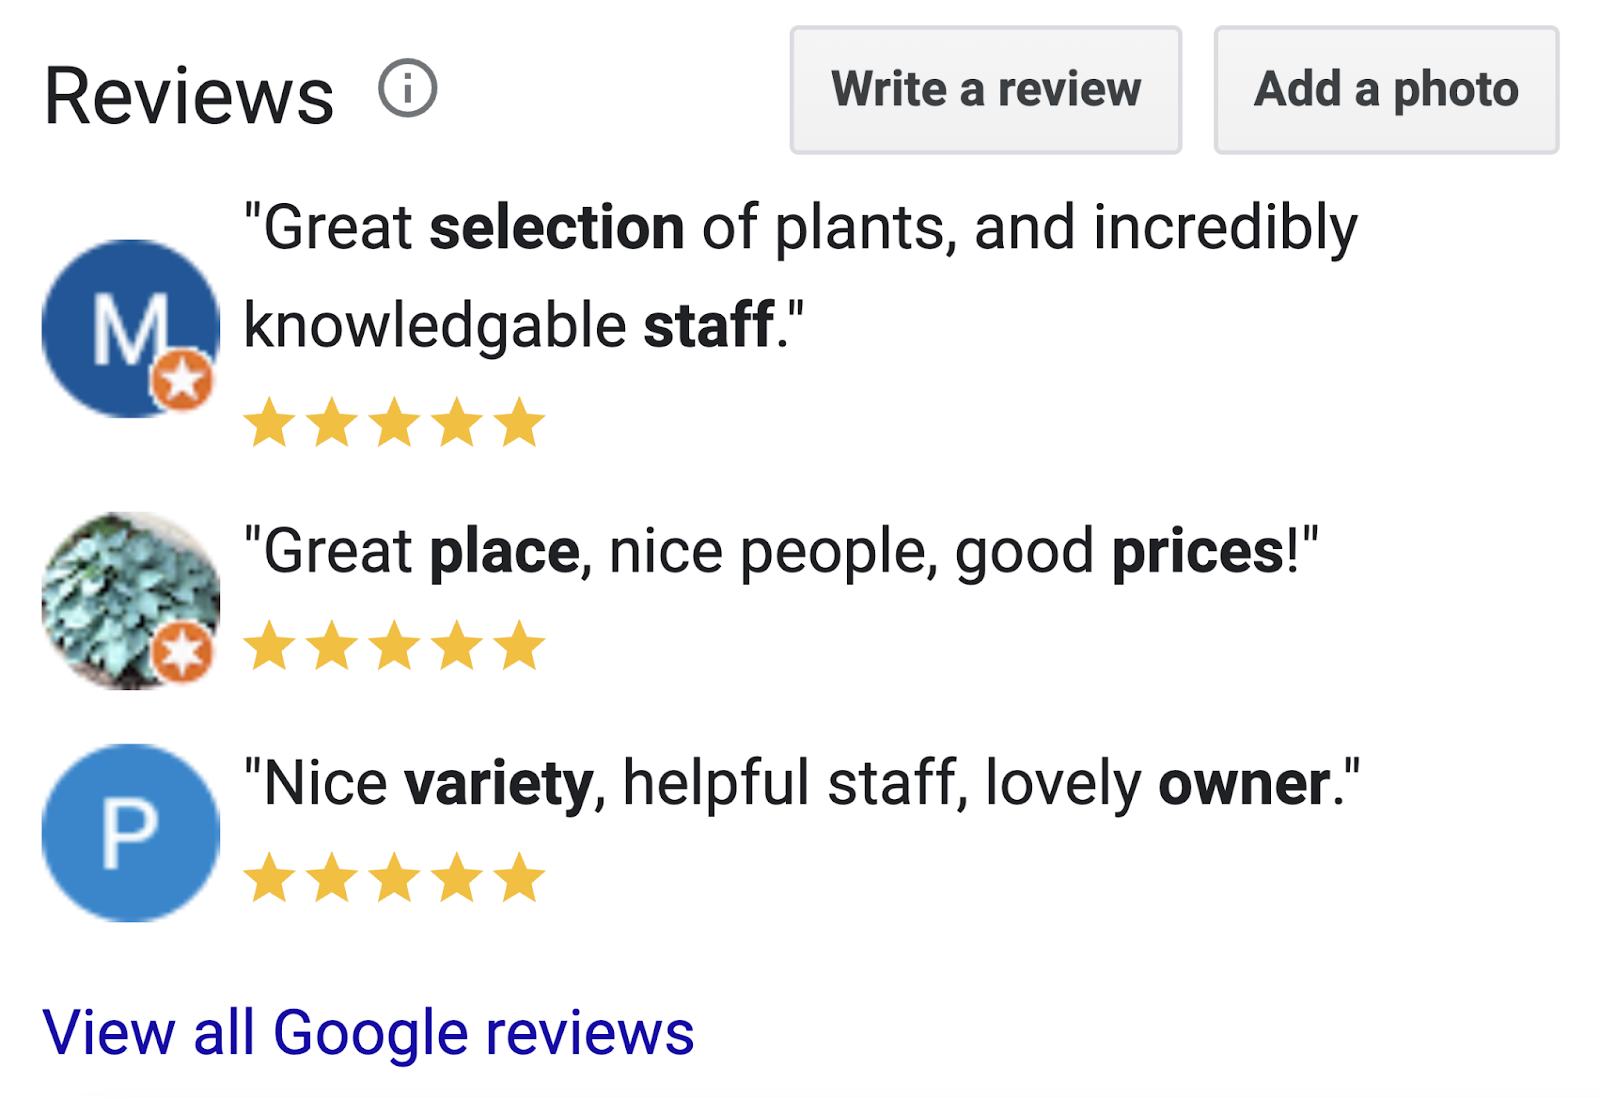 "Reviews" section for "GROW Geneva" business